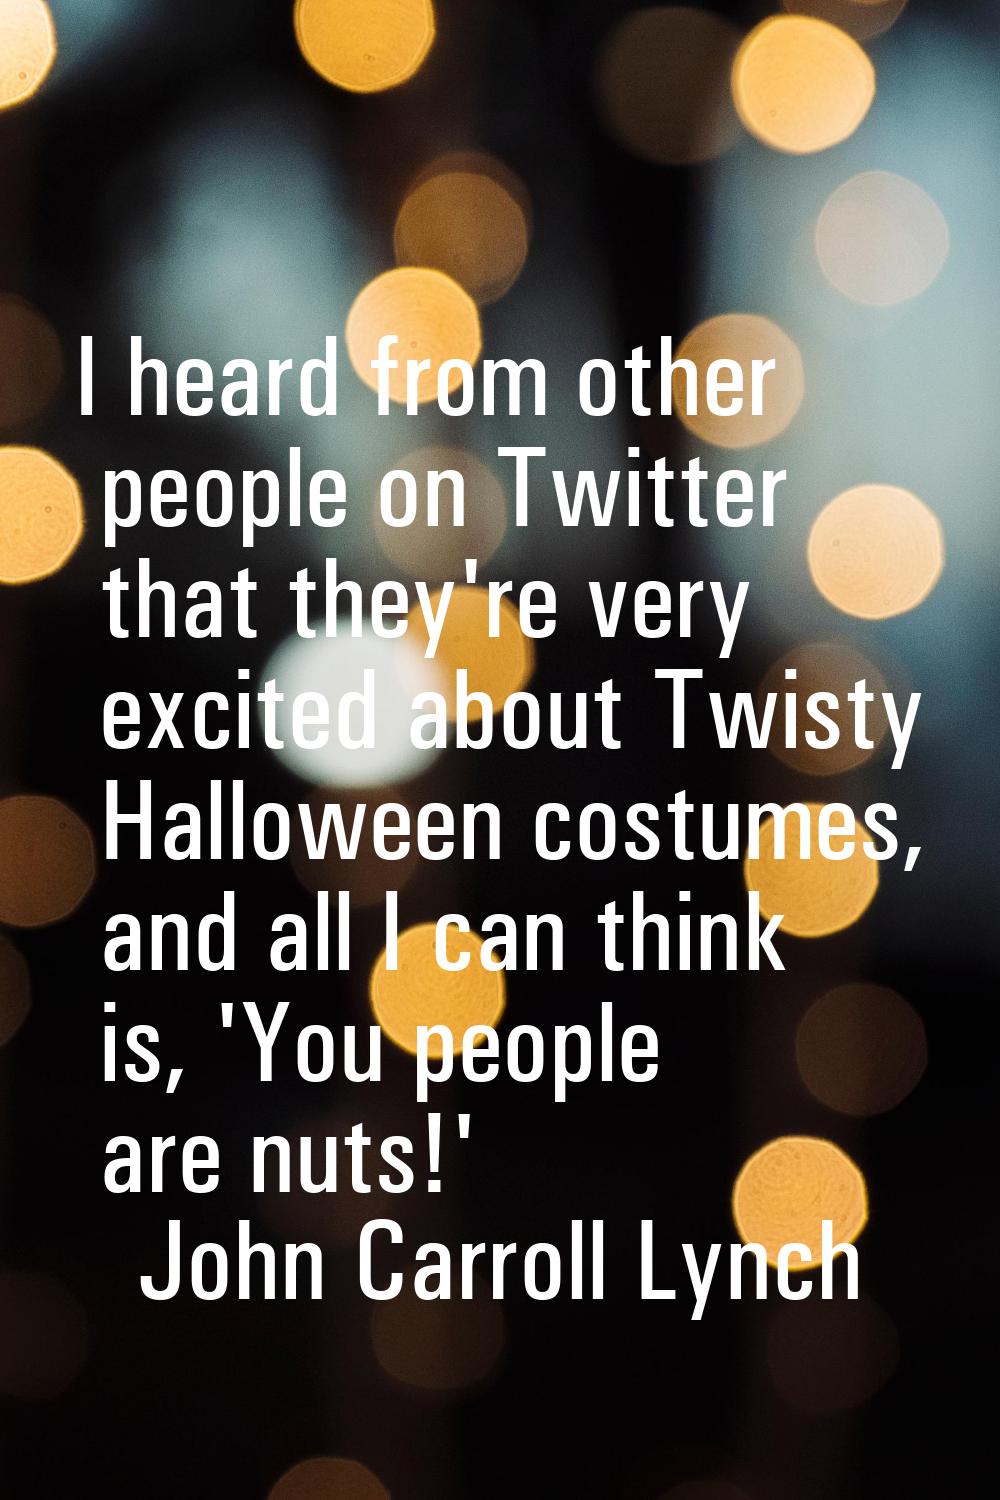 I heard from other people on Twitter that they're very excited about Twisty Halloween costumes, and